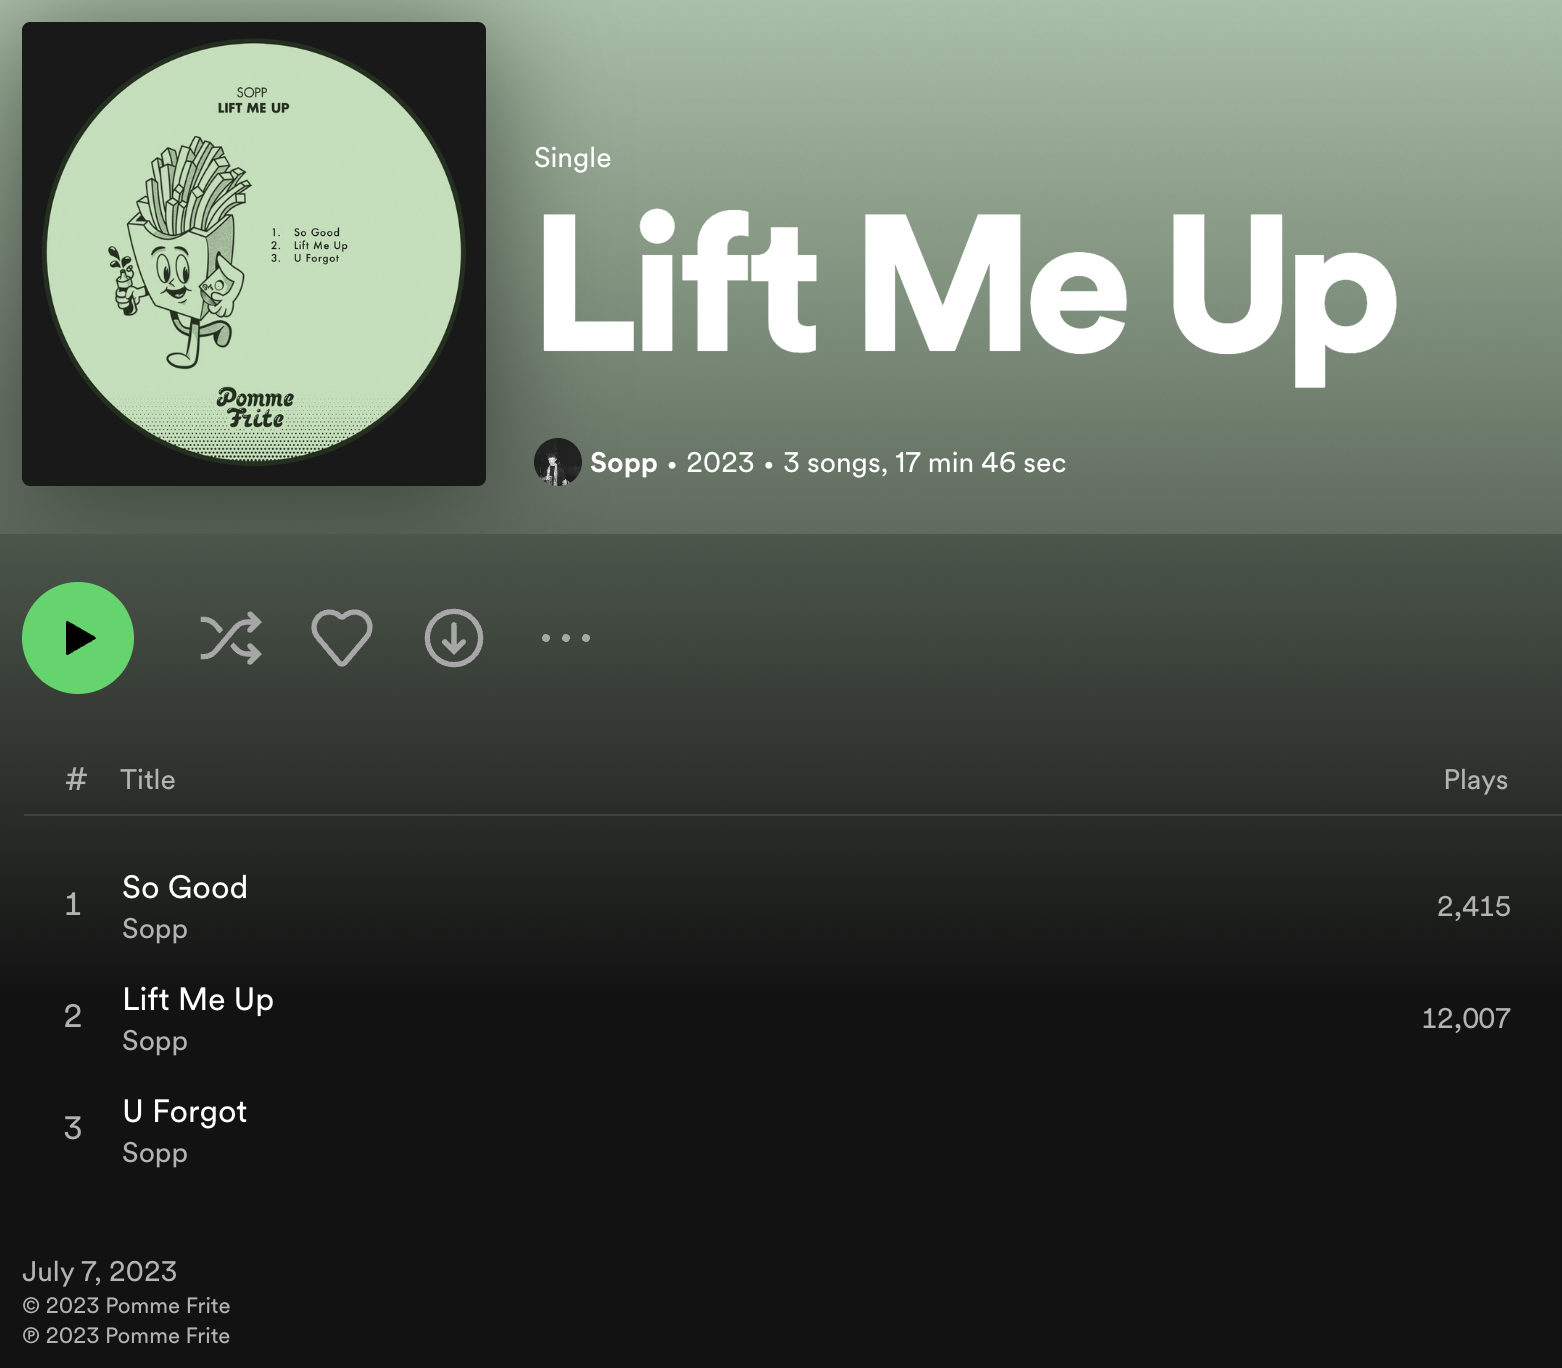 Screenshot of the Sopp single Lift Me Up in Spotify, with one track So Good having 2,415 listens, Lift Me Up having 12,007 listens, and the third track, U Forgot, with 0 listens listed. The single was released on July 7, 2023, on Pomme Frite.